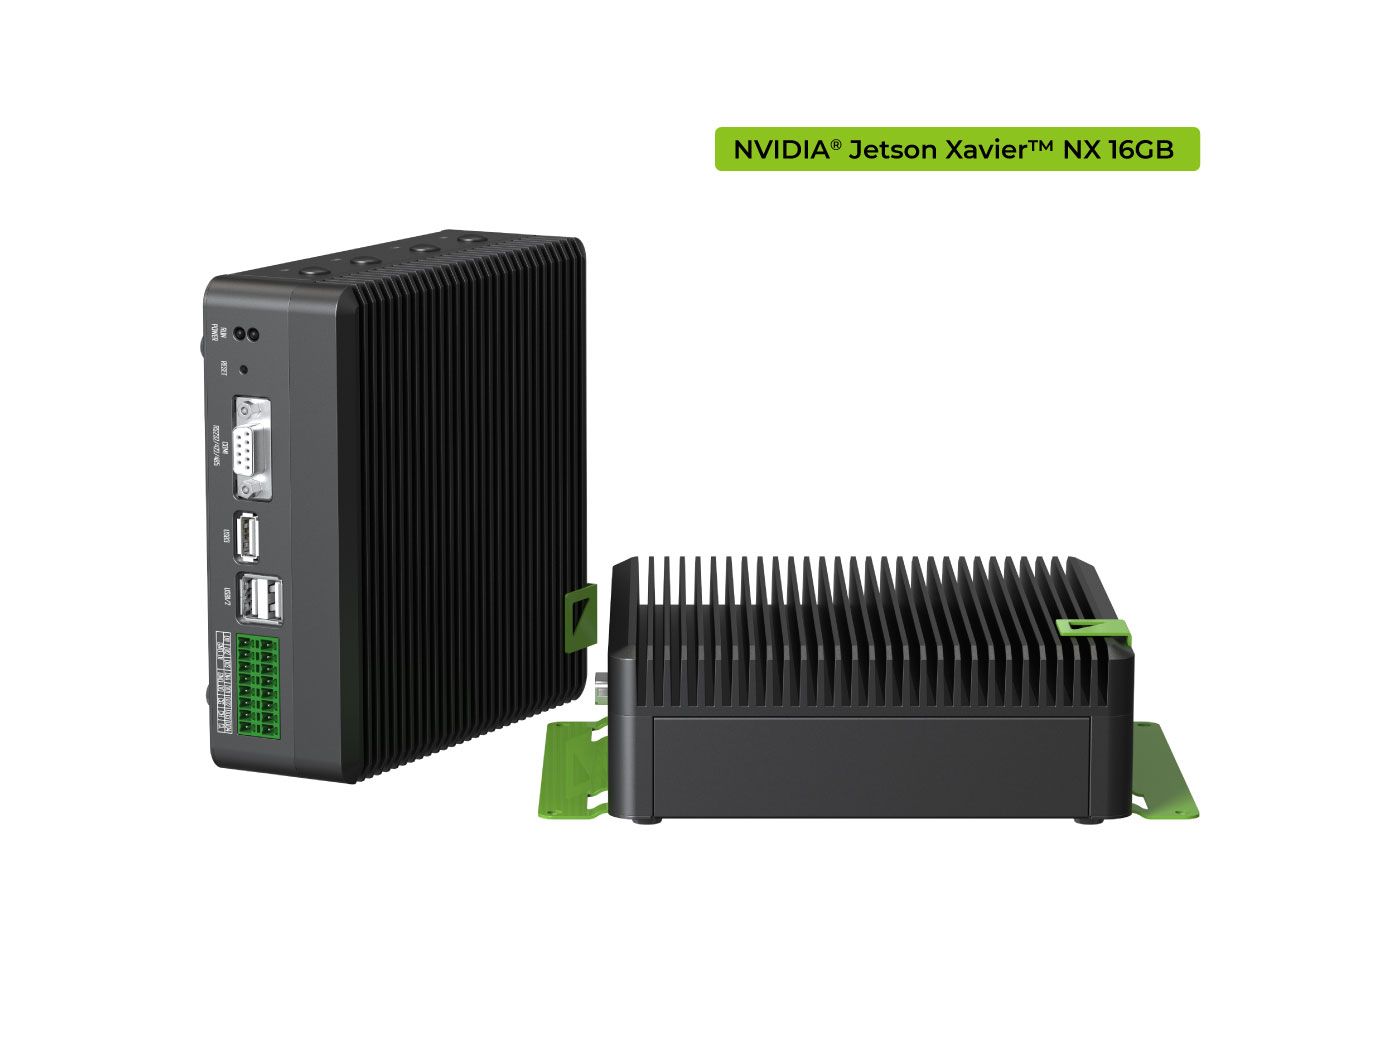 [110110189]reComputer?Industrial?J2012- Fanless Edge AI Device with Jetson Xavier NX 16GB module, Aluminum case with passive cooling, 2xRJ45 GbE, 1xRS232/RS-422/RS-485, 4xDI/DO, 1xCAN, 3xUSB3.2, Pre-installed Je